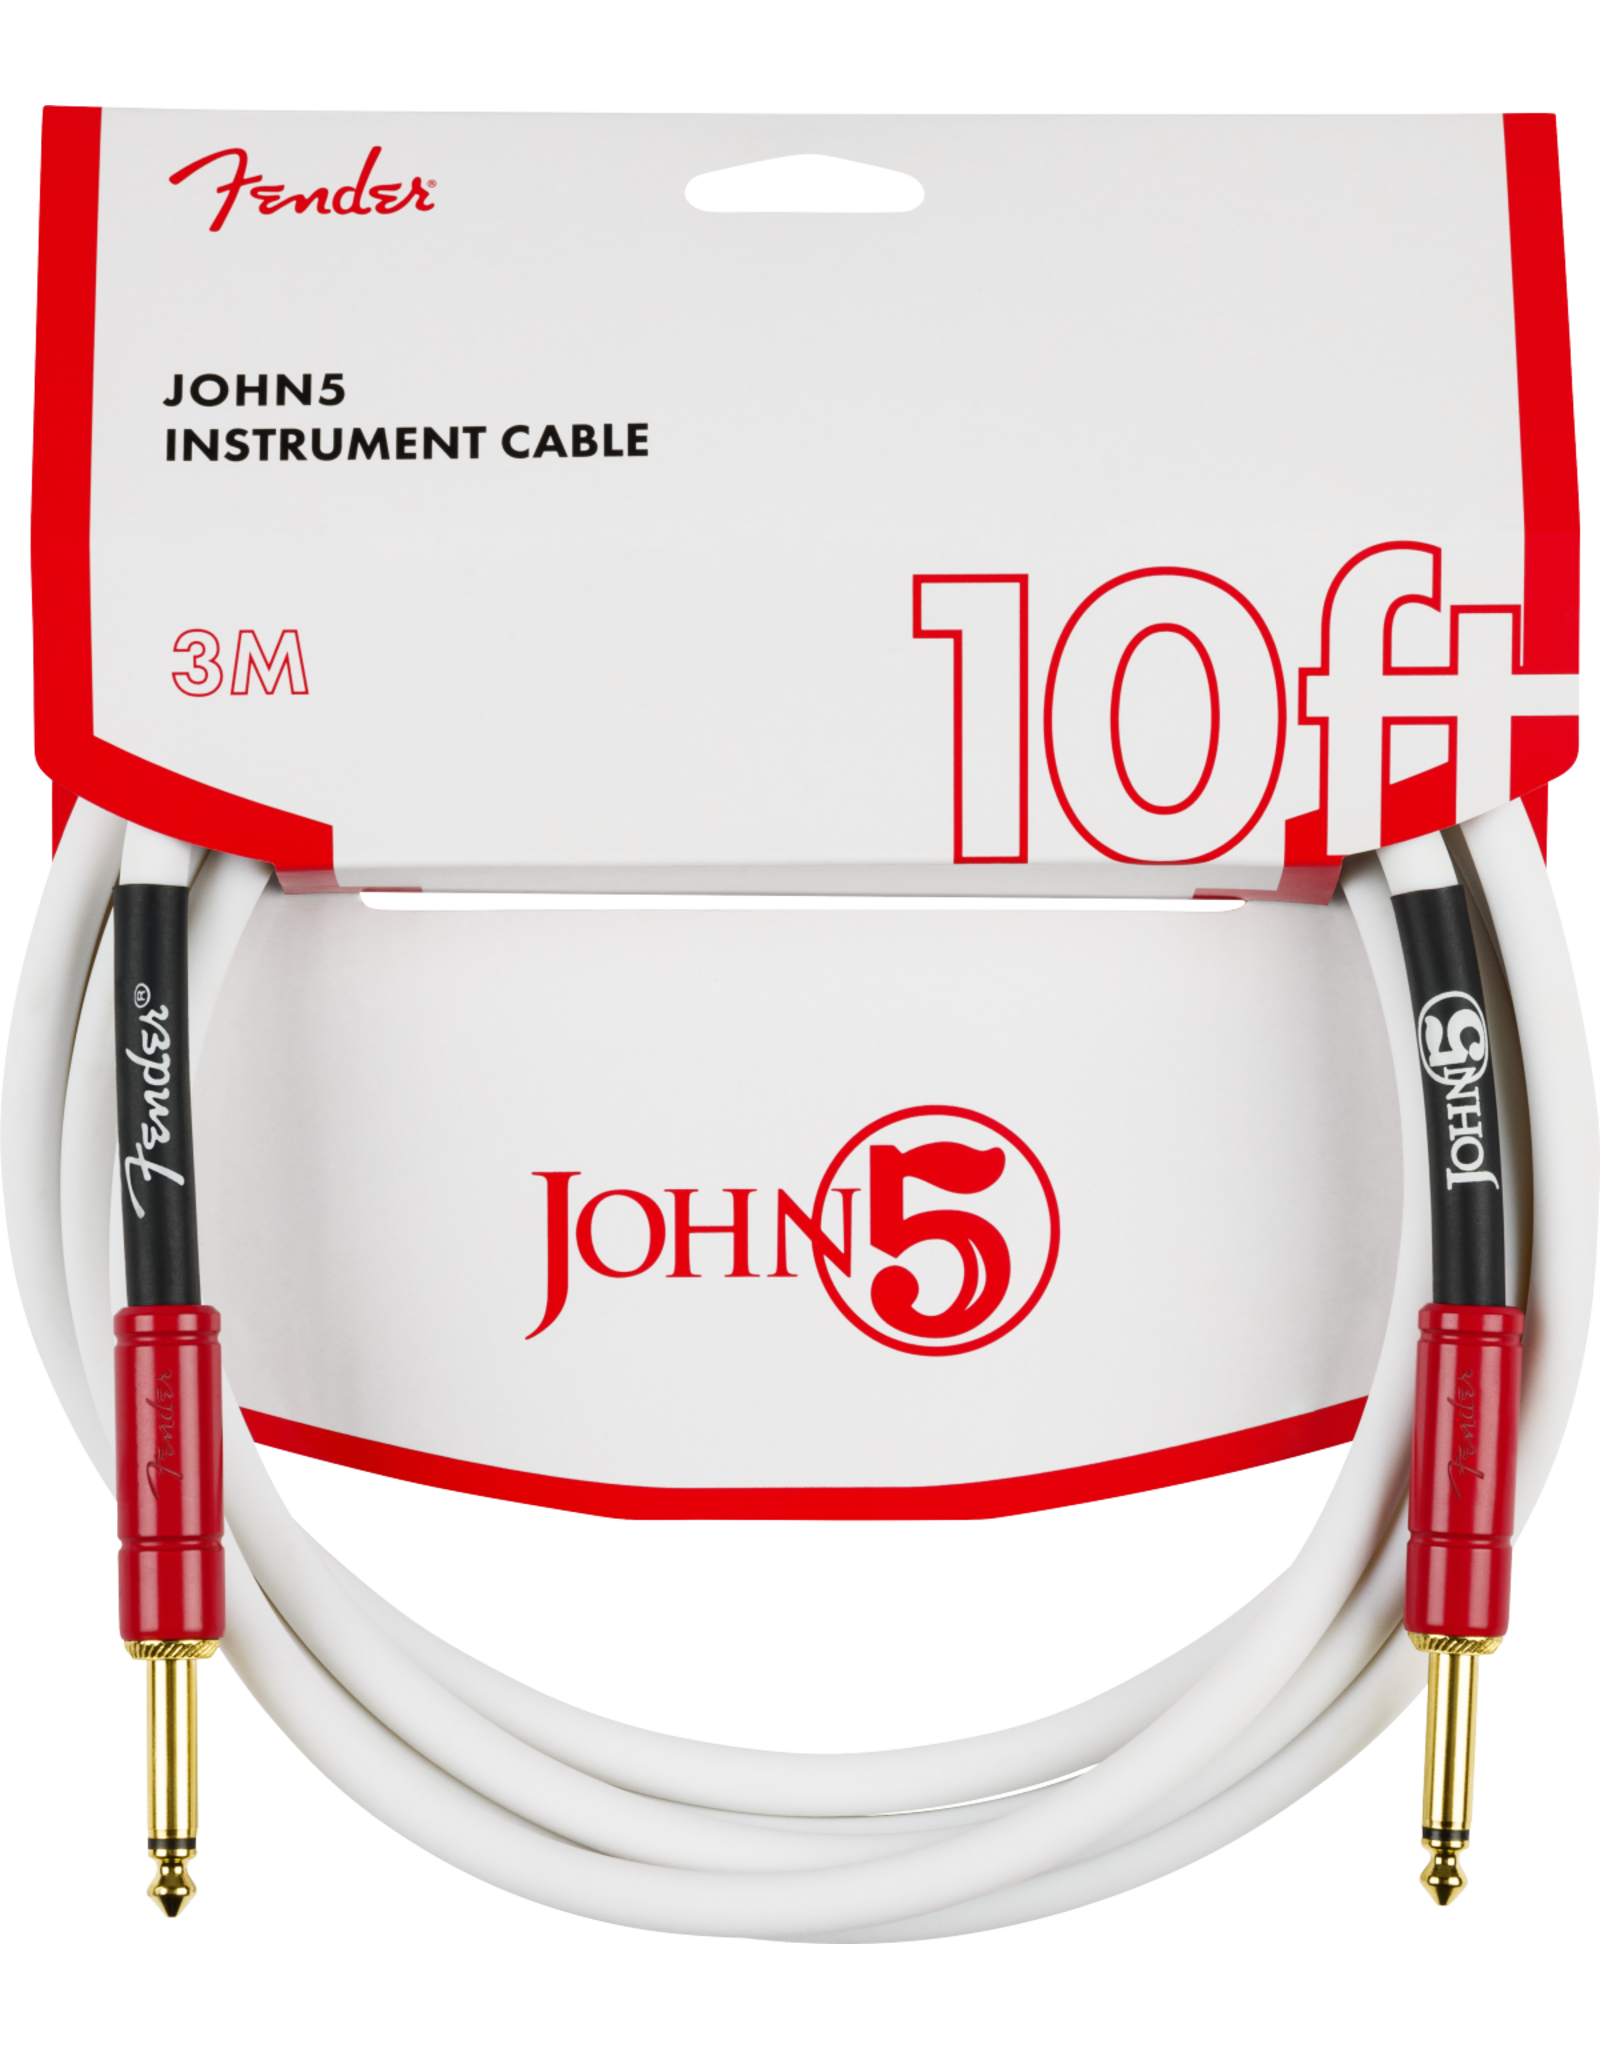 Fender Fender John 5 Instrument Cable, White and Red, 10'